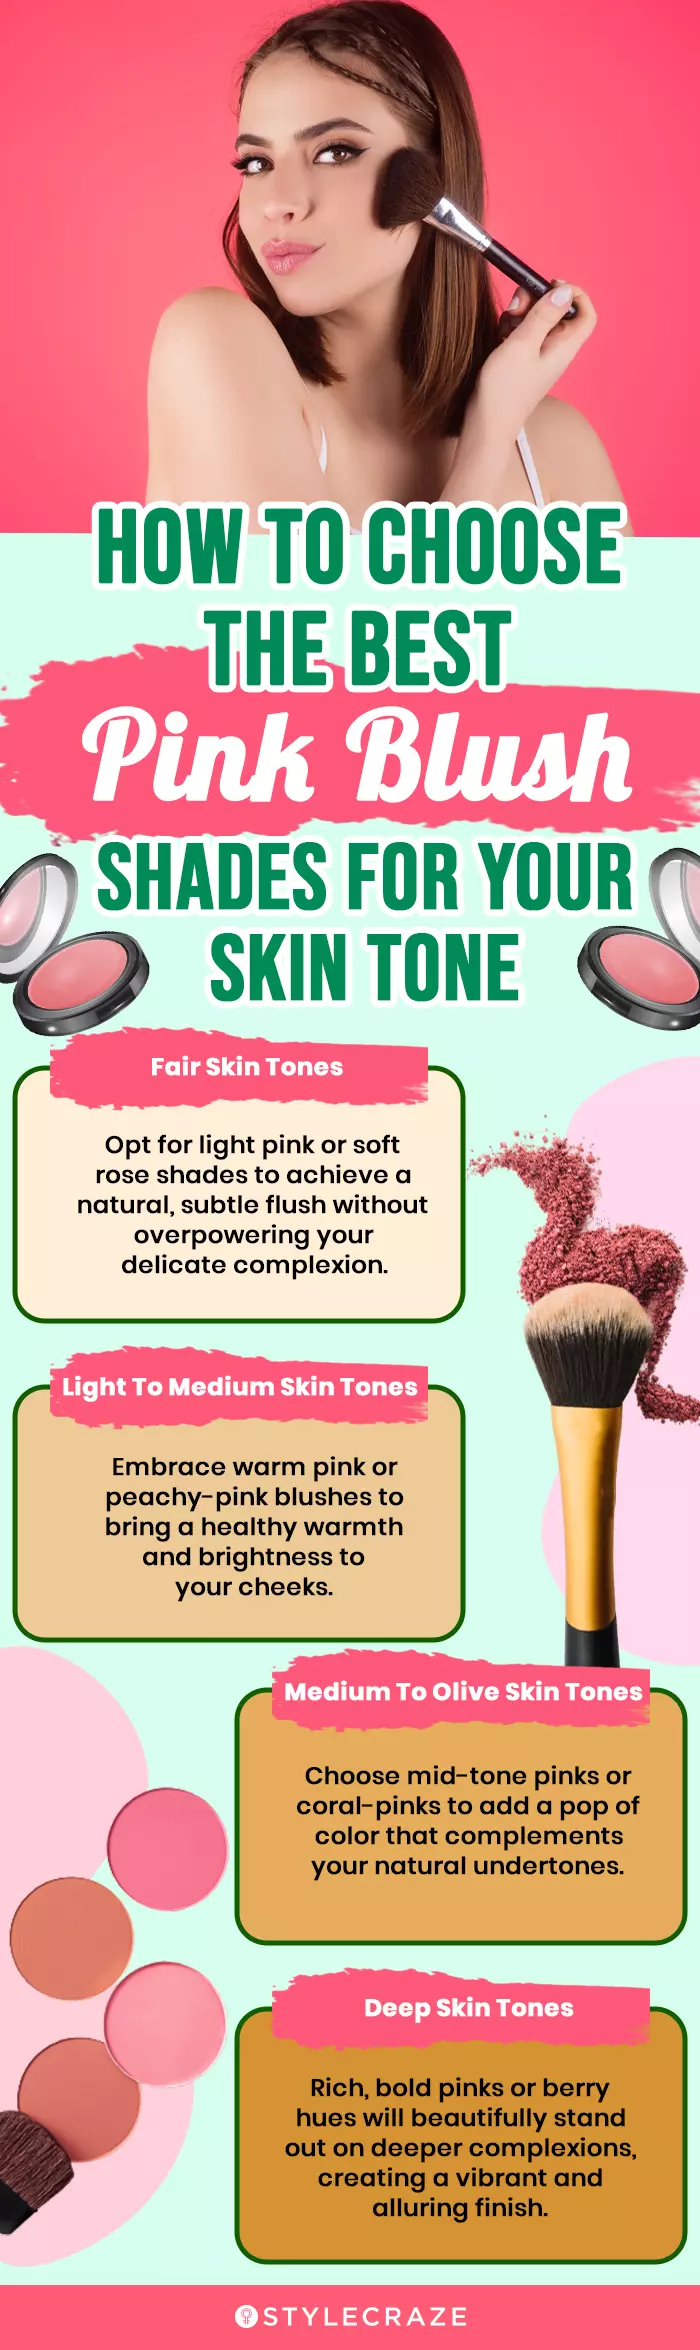 How To Choose The Best Pink Blush Shades For Your Skin Tone (infographic)